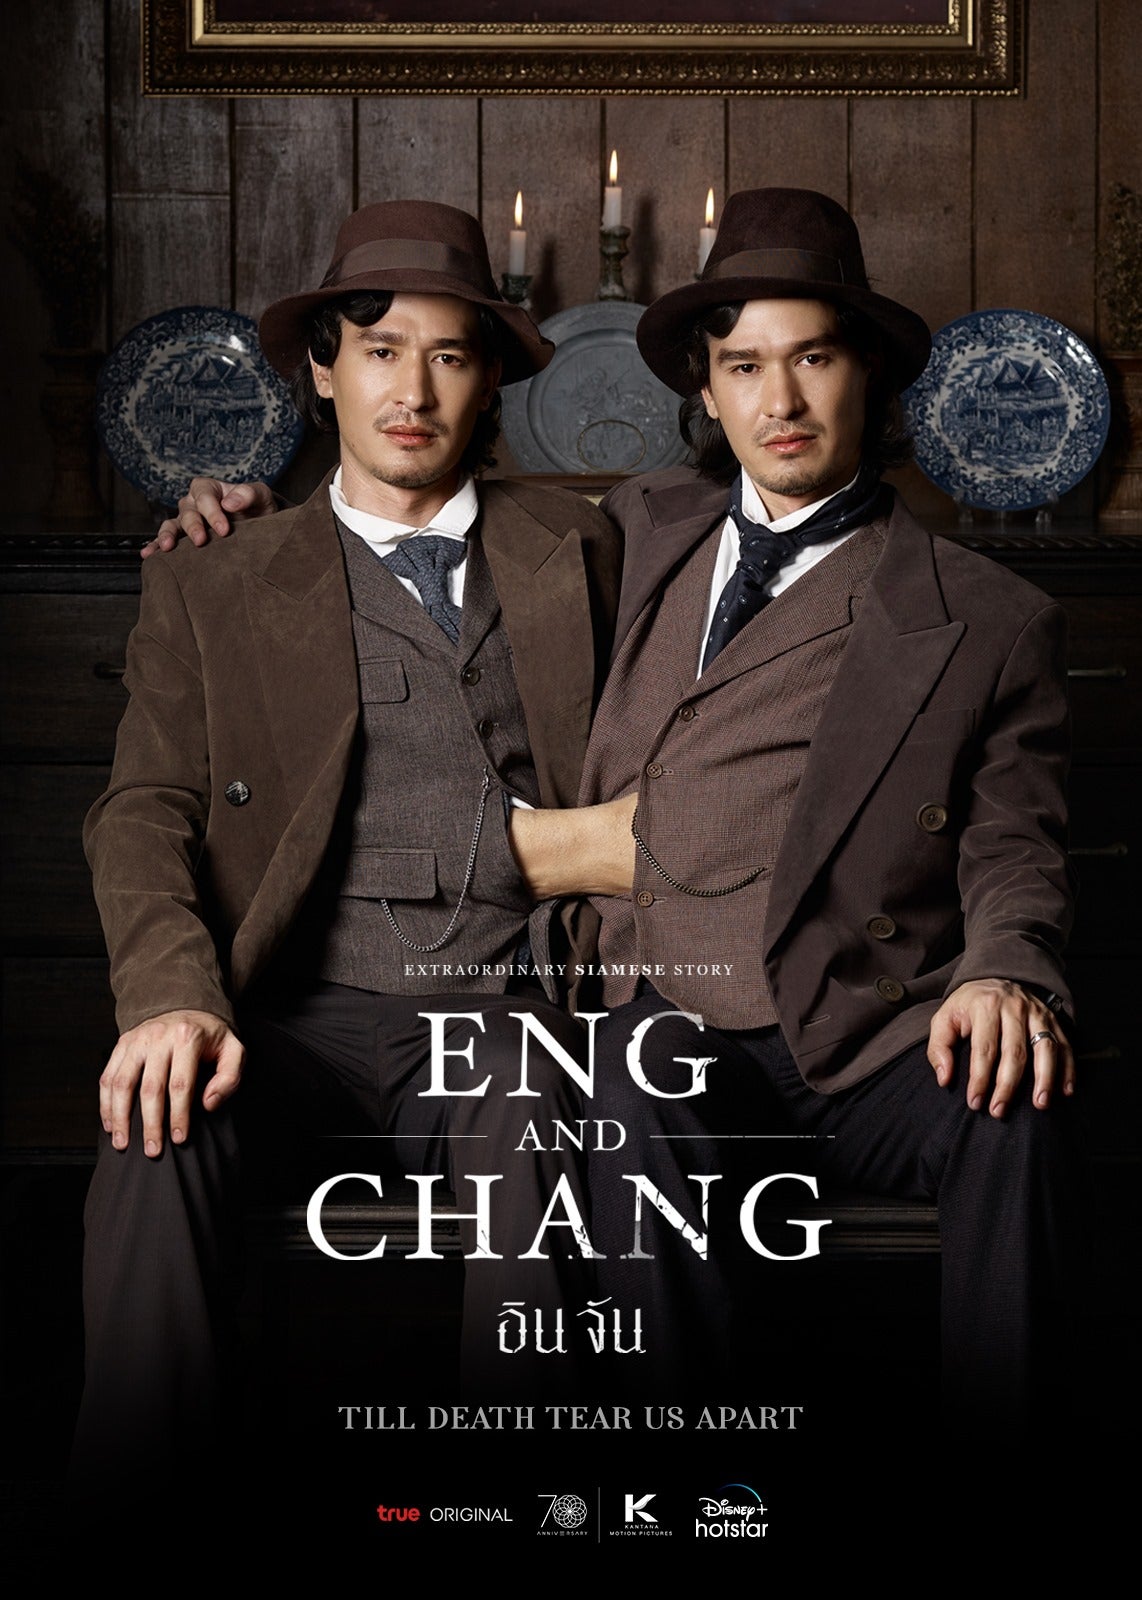 TV ratings for Extraordinary Siamese Story: Eng And Chang (อินจัน) in Norway. Disney+ TV series